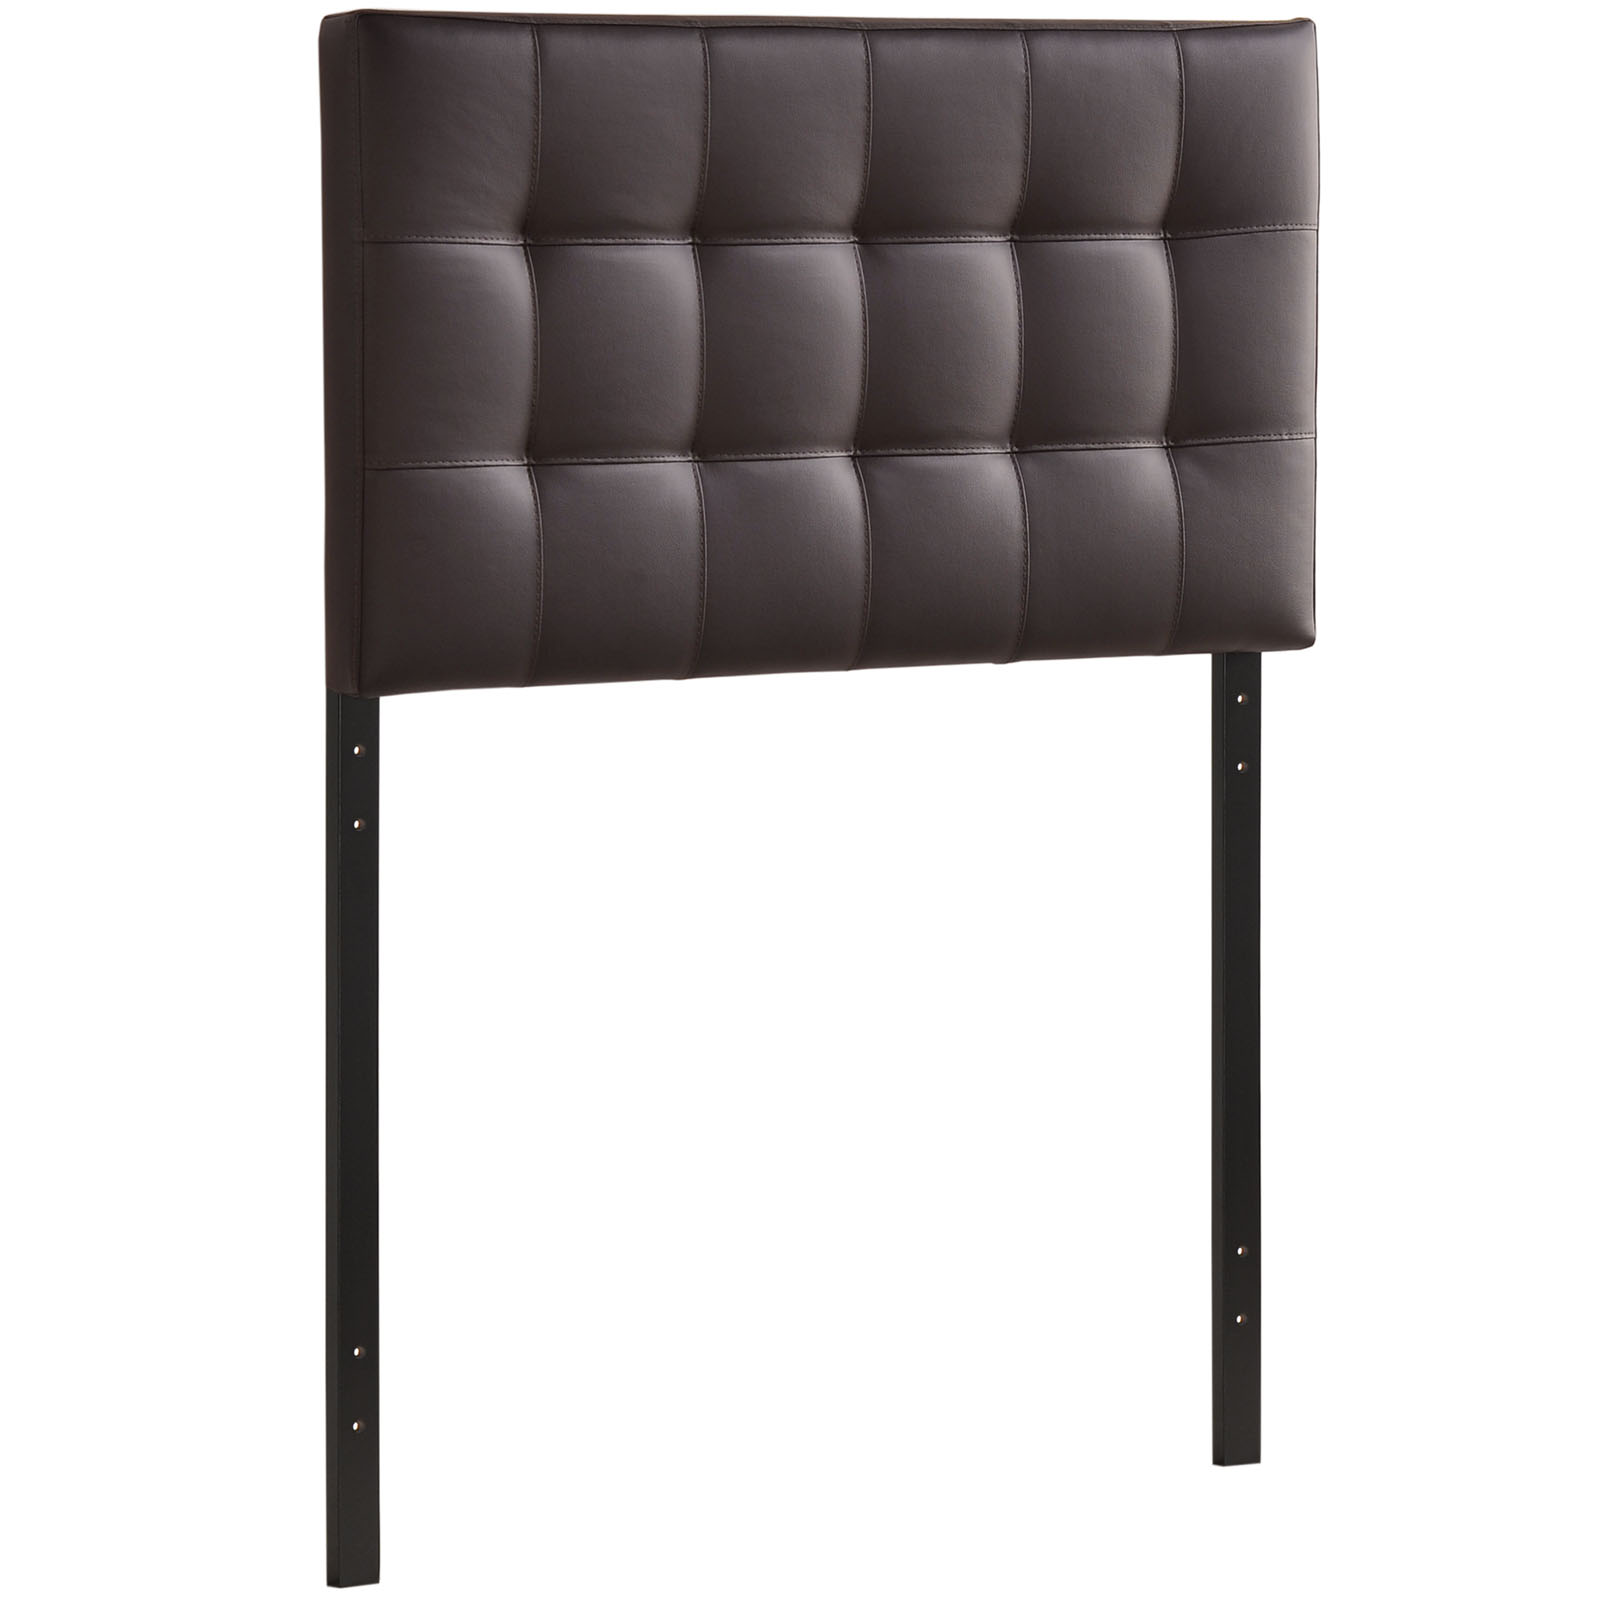 Modway Lily Twin Upholstered Vinyl Headboard in Brown - image 4 of 5